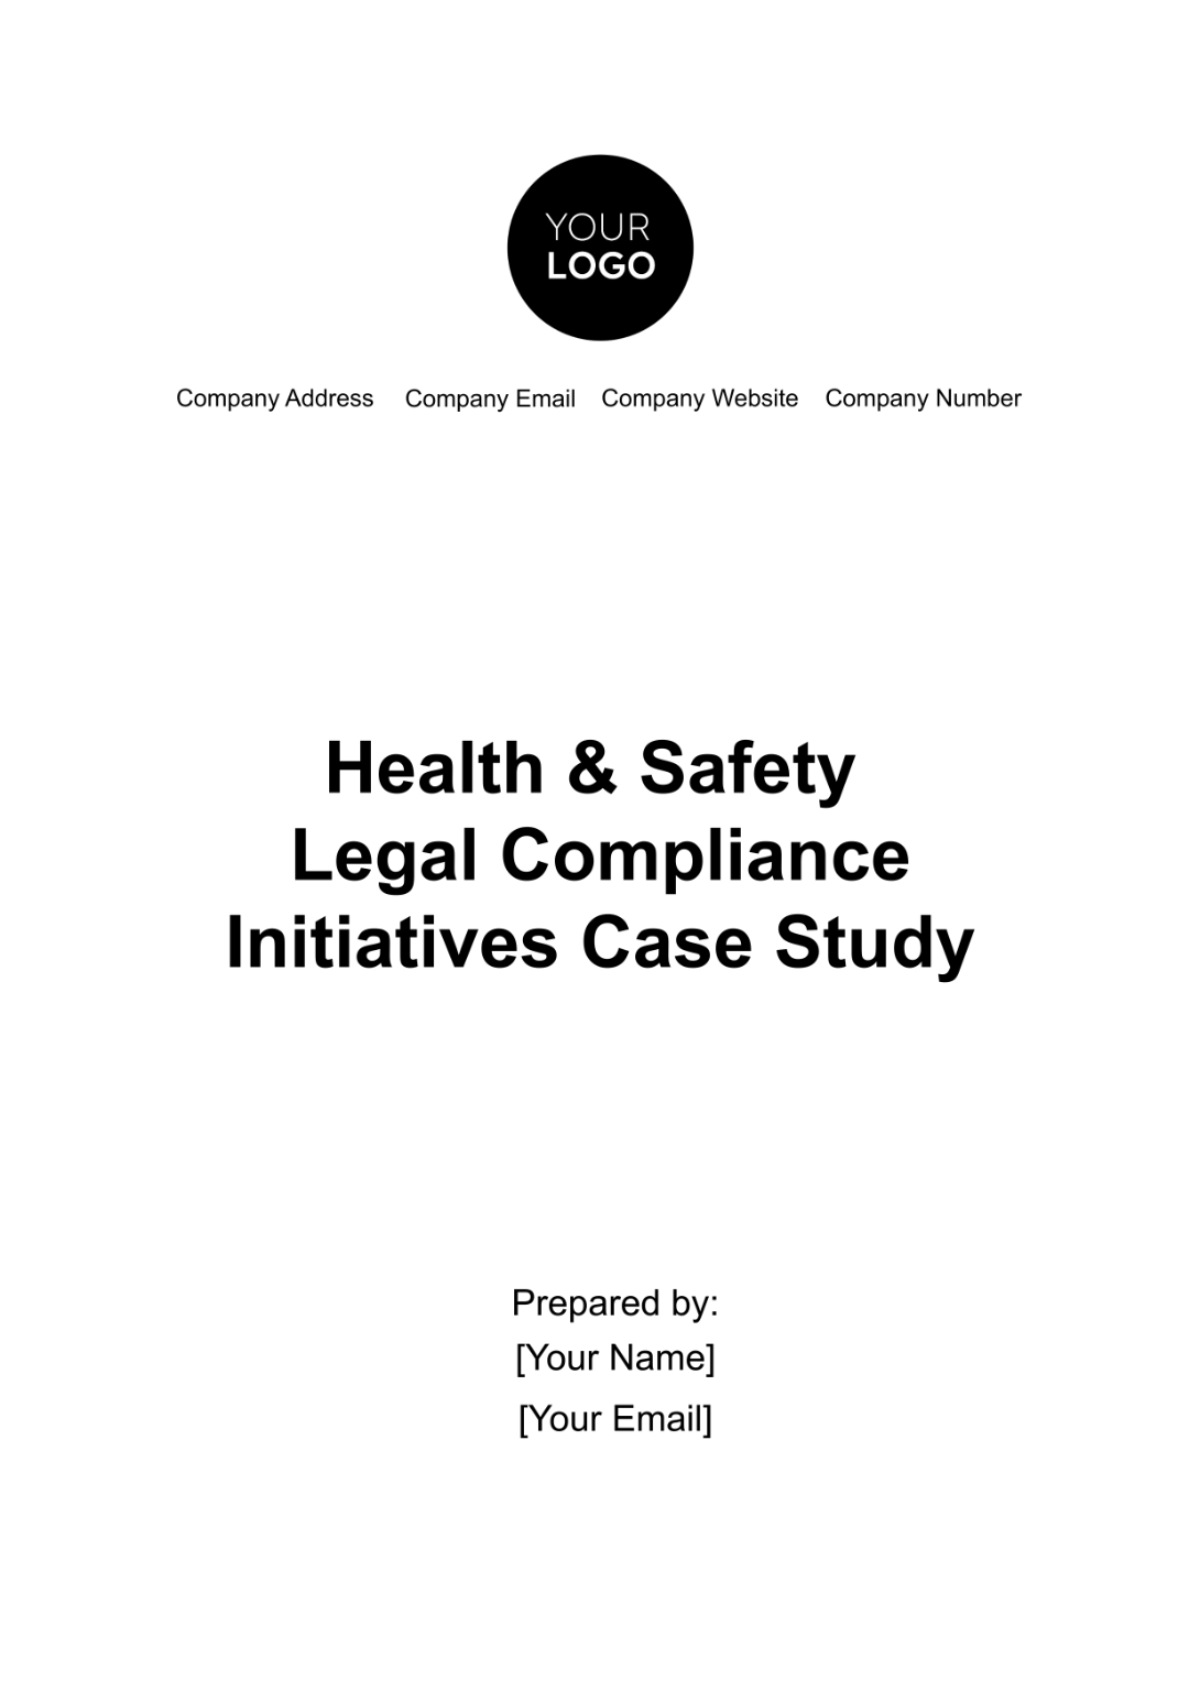 Free Health & Safety Legal Compliance Initiatives Case Study Template